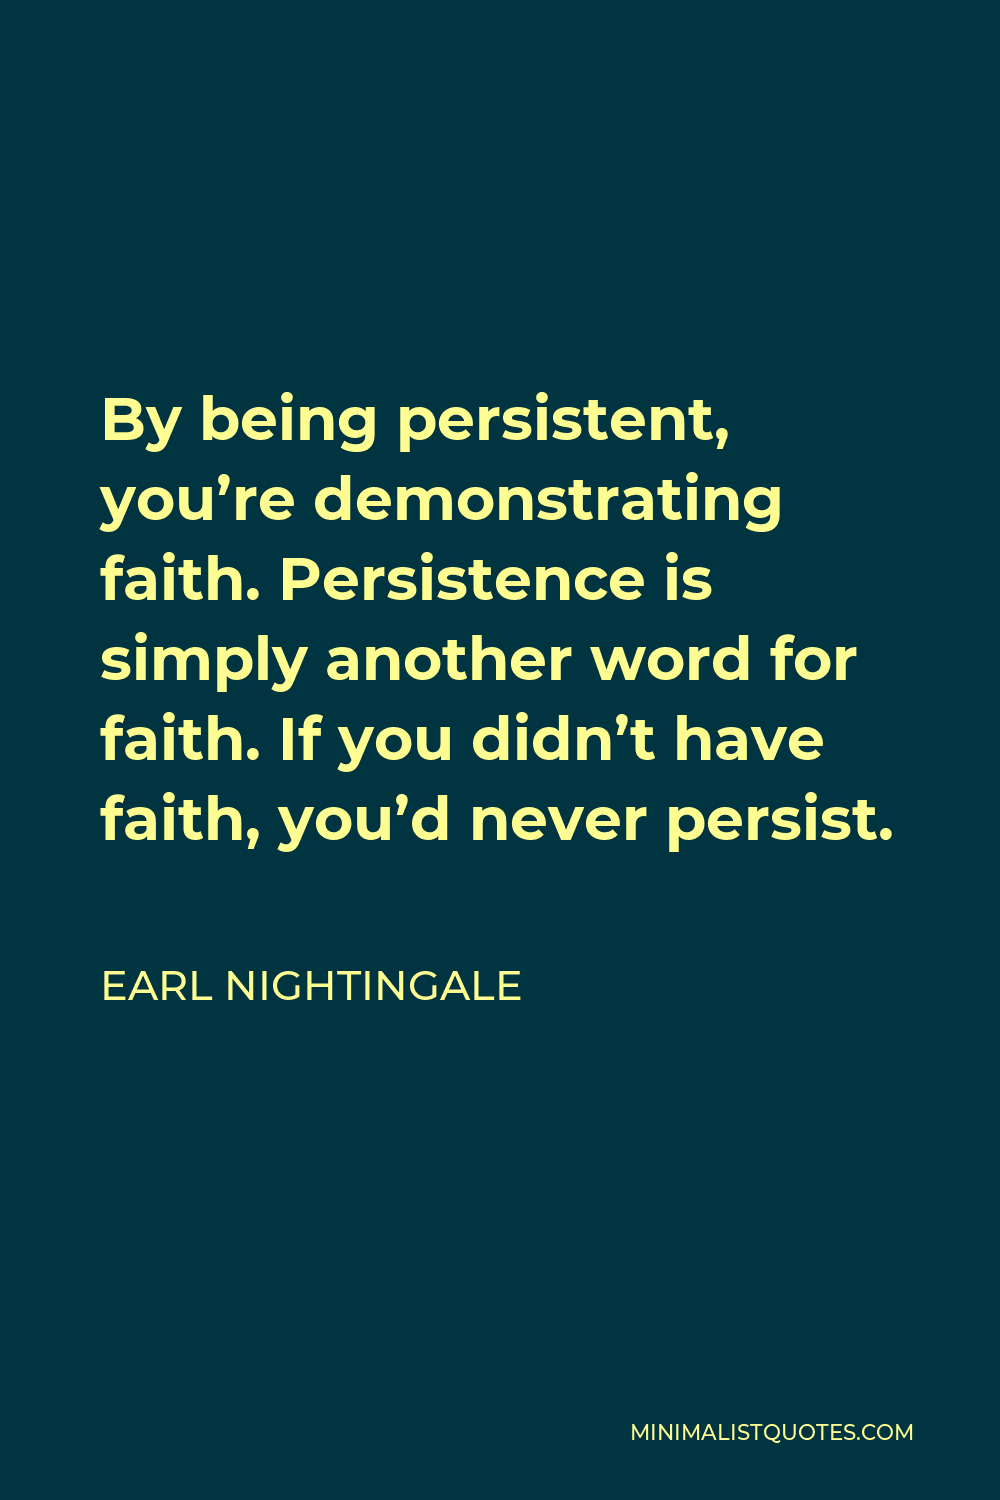 Earl Nightingale Quote - By being persistent, you’re demonstrating faith. Persistence is simply another word for faith. If you didn’t have faith, you’d never persist.